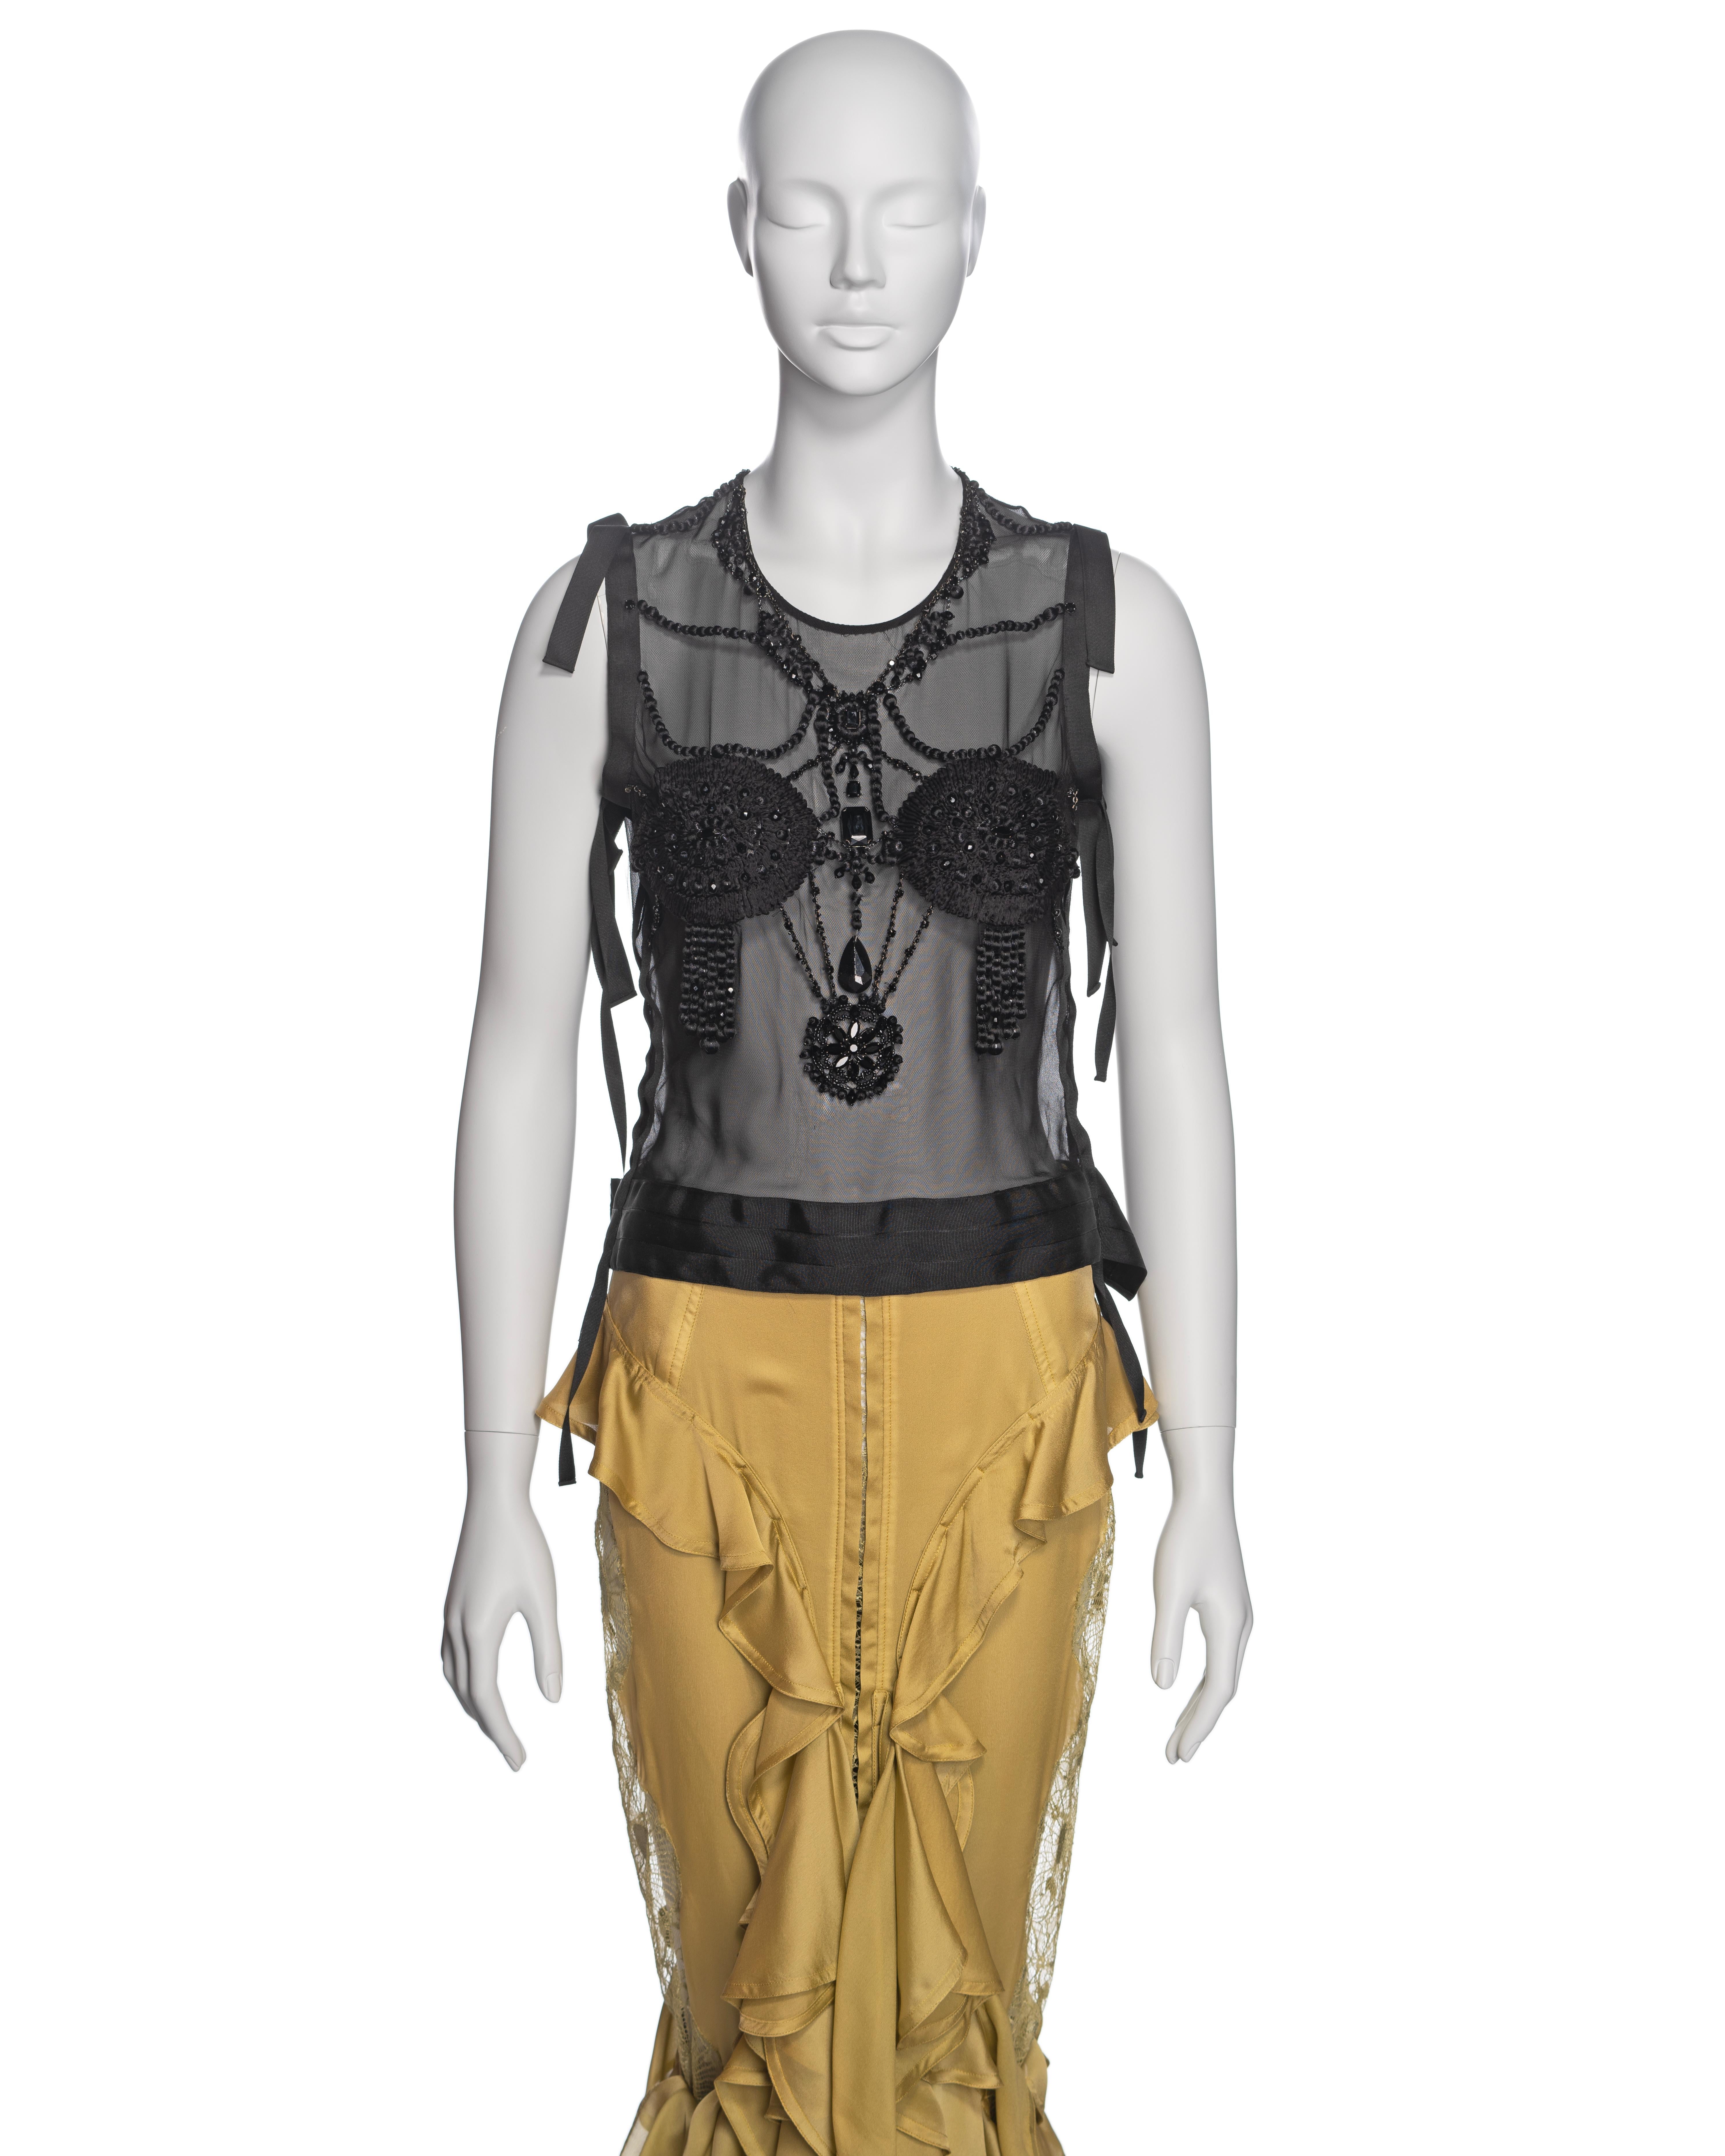 Women's Yves Saint Laurent by Tom Ford Embellished Top and Silk Skirt Ensemble, FW 2003